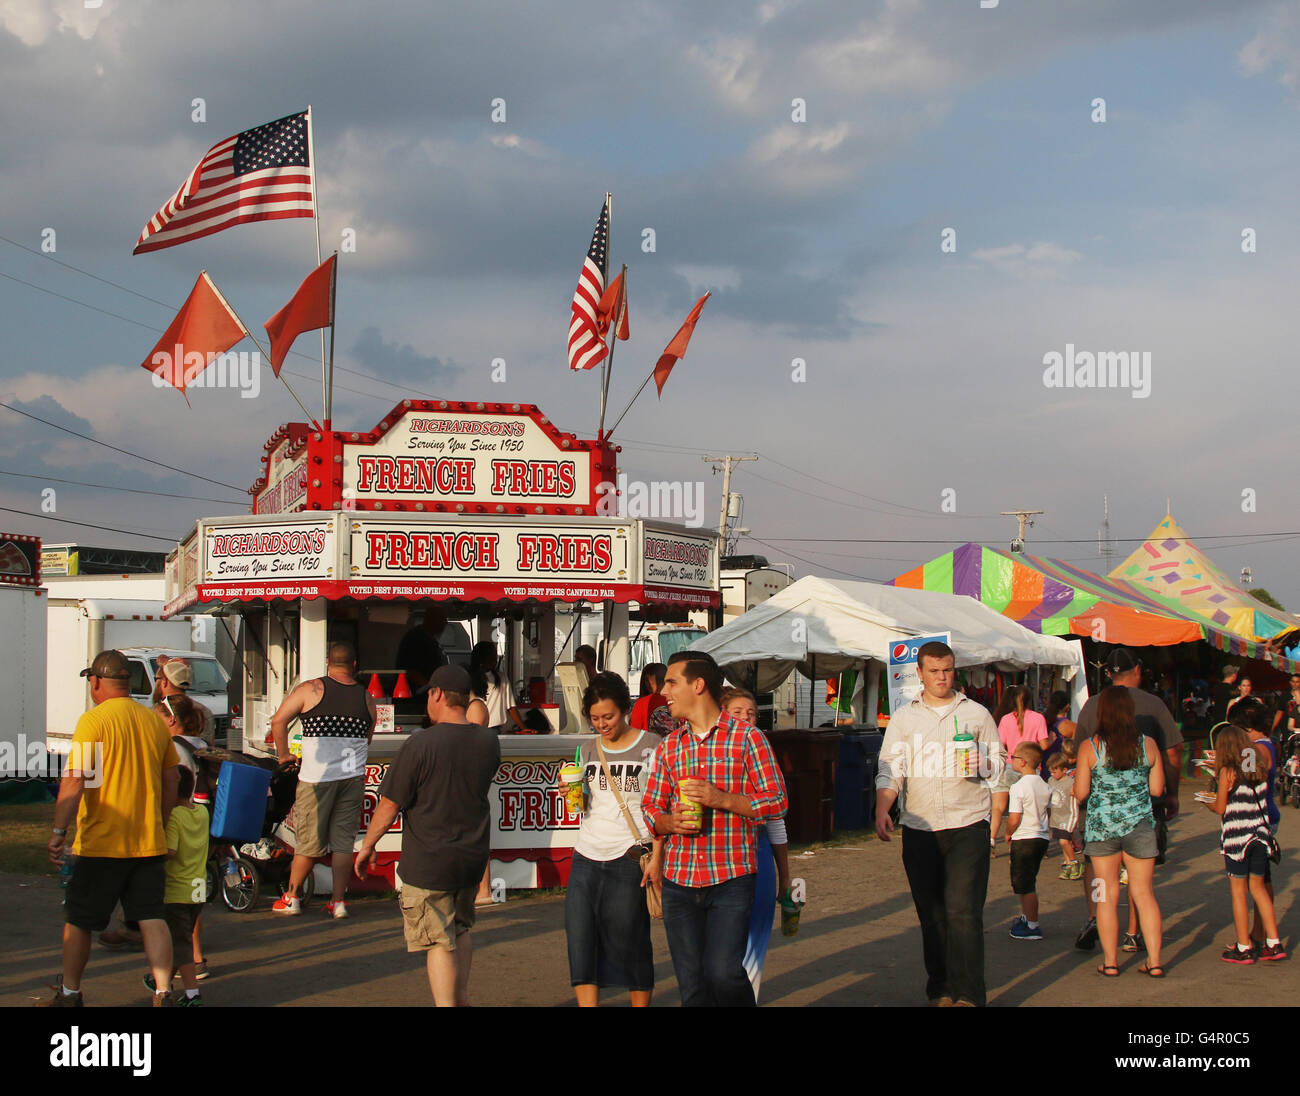 Richardsons patatine fritte. Fair Midway. Canfield fiera. Mahoning County Fair. Canfield, Youngstown, Ohio, Stati Uniti d'America. Foto Stock